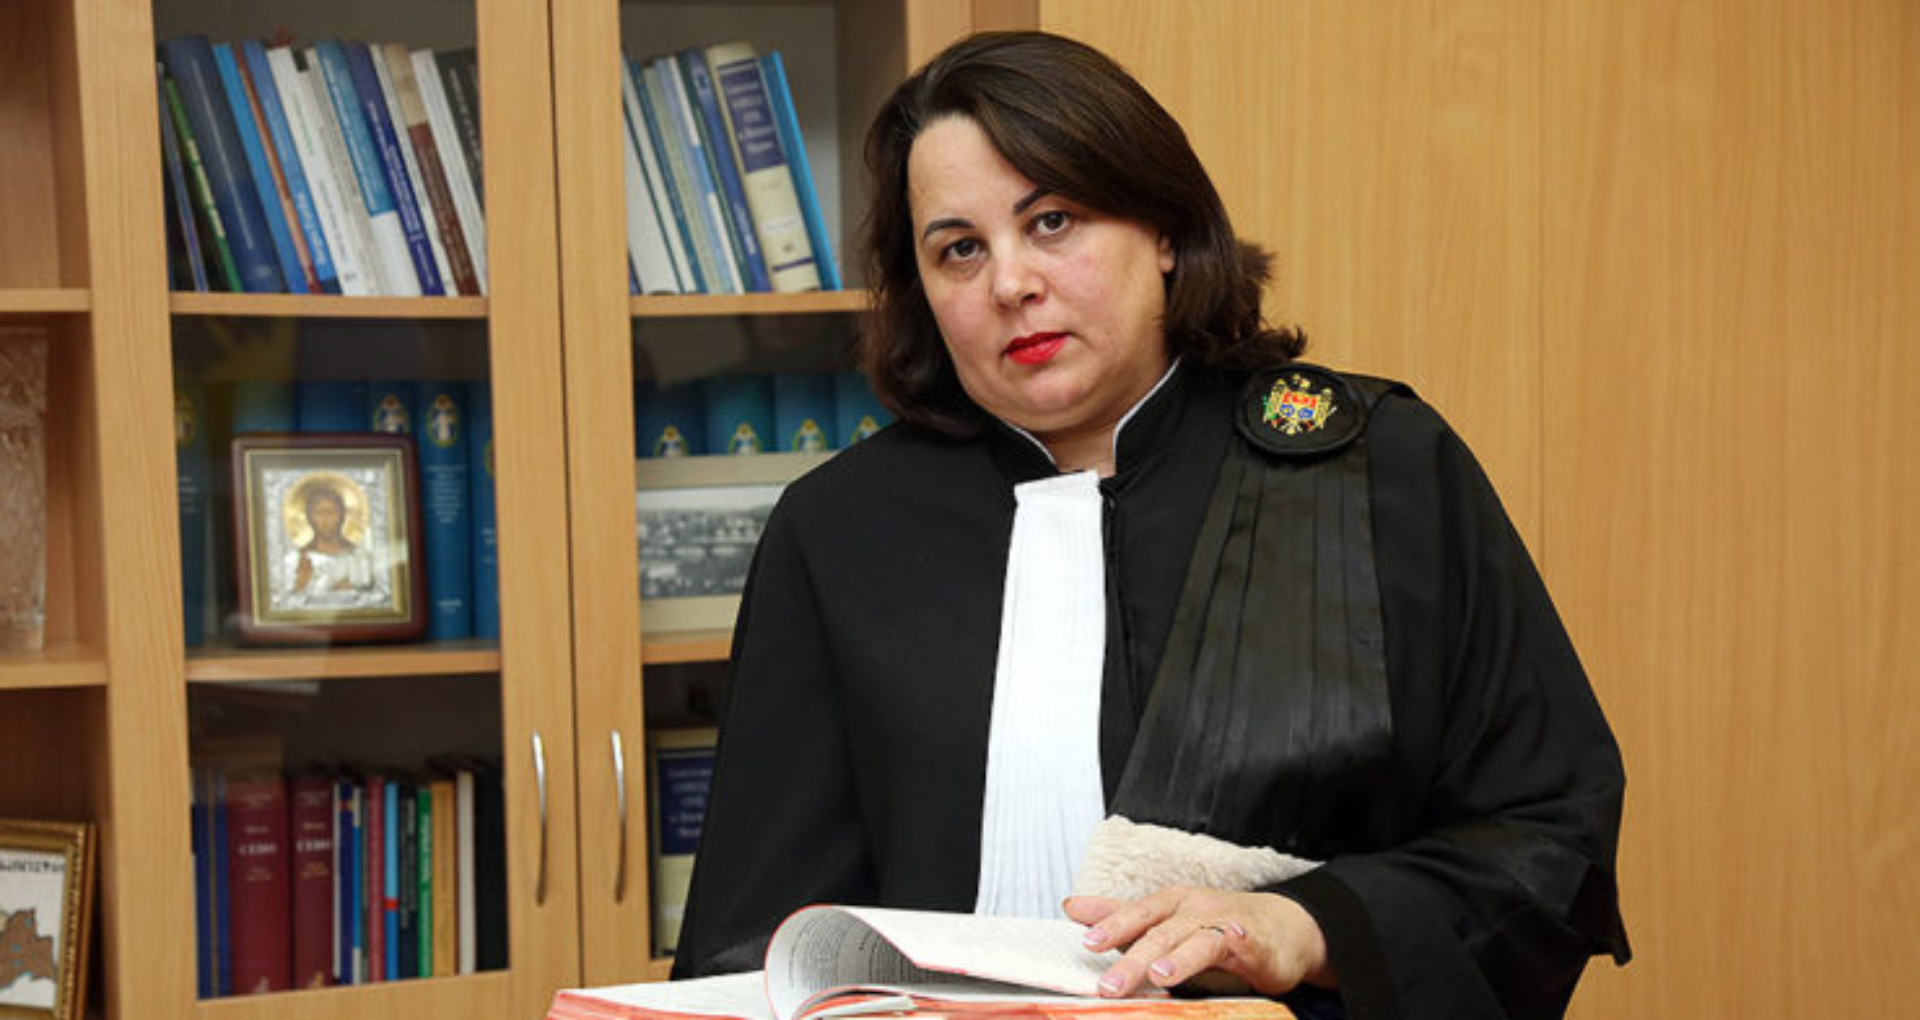 Judge Viorica Puica, temporarily transferred to the Supreme Court of Justice, will act as interim president of the court